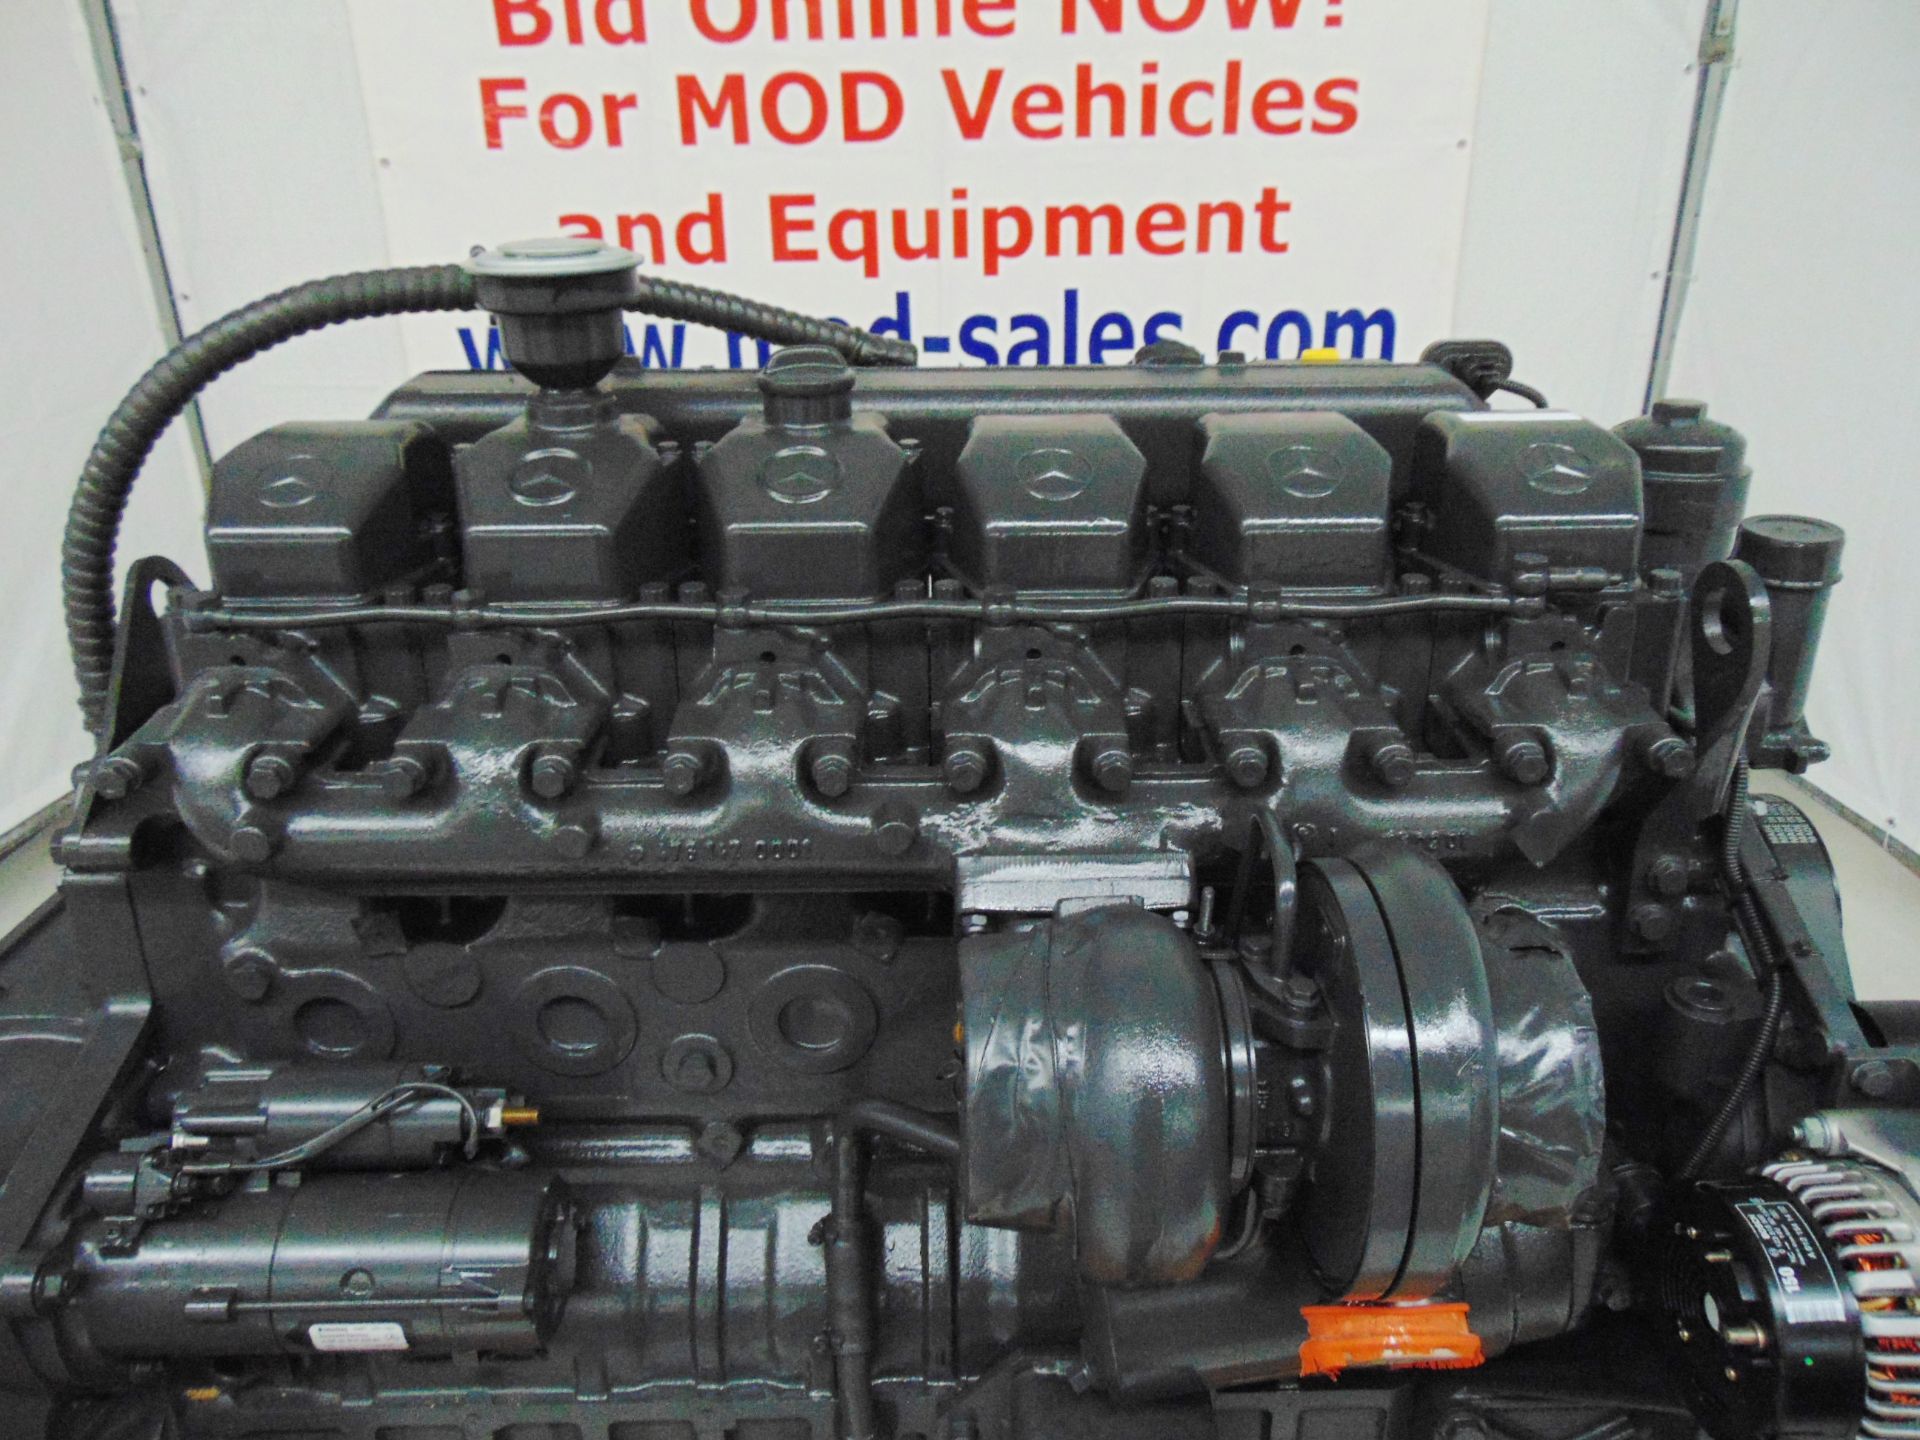 Factory Reconditioned Mercedes-Benz OM424 V12 Turbo Diesel Engine - Image 24 of 34